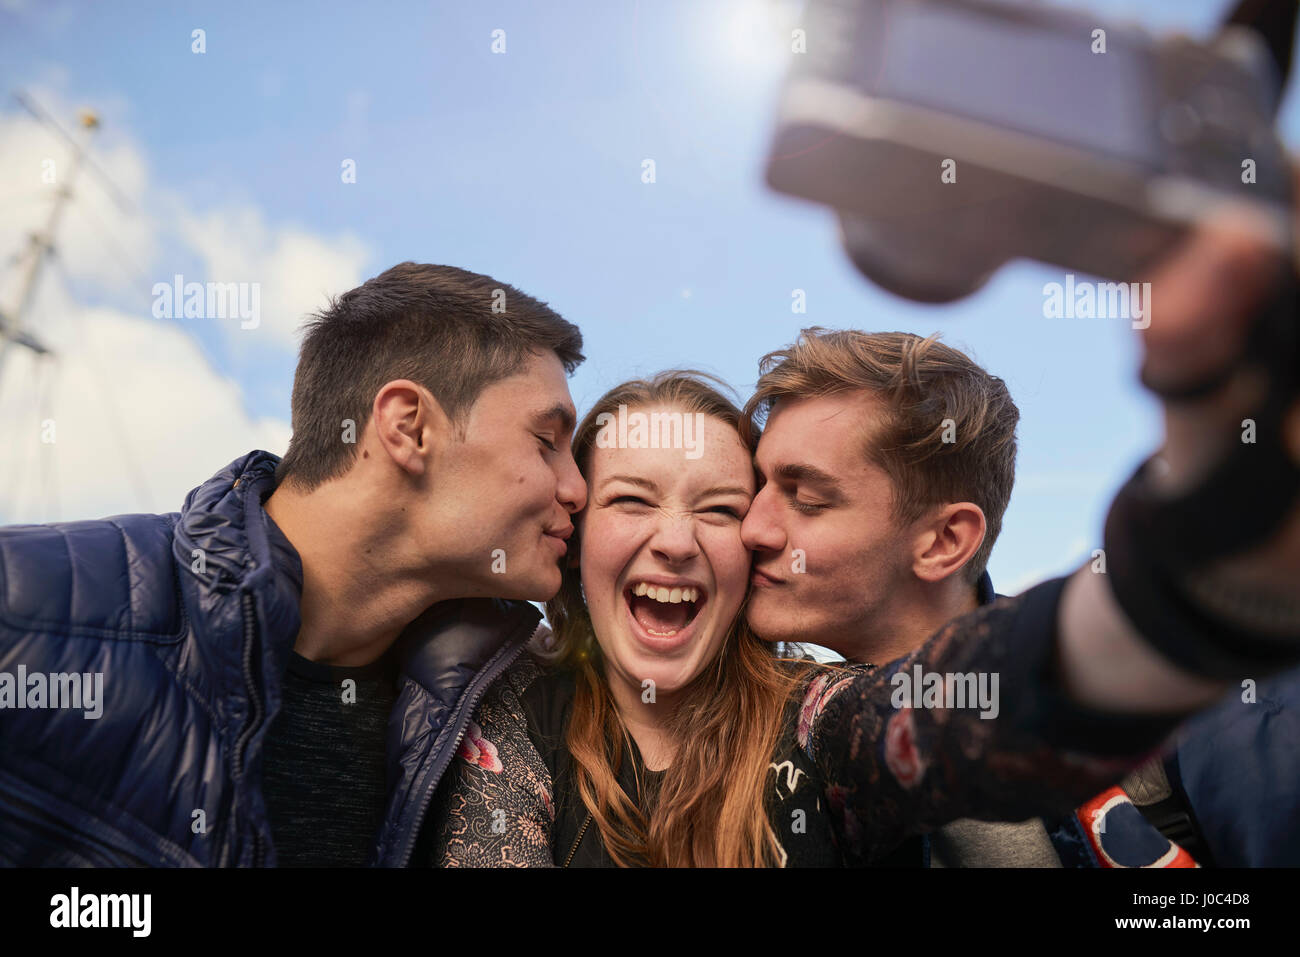 Three friends taking selfie with camera, young men kissing young woman on cheek, Bristol, UK Stock Photo